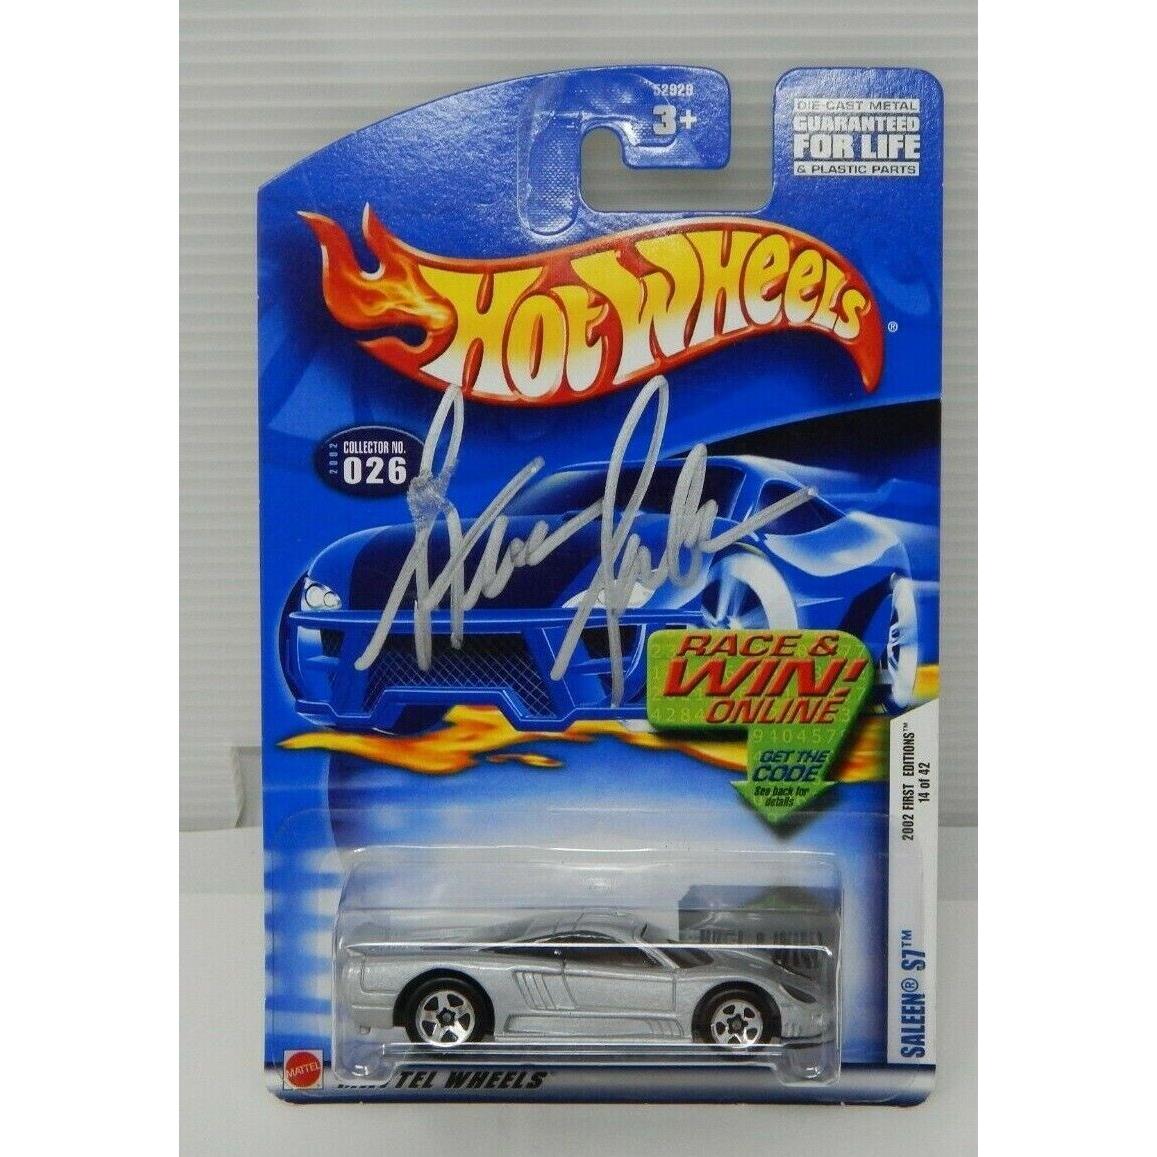 Hot Wheels Collector No. 026 Saleen S7 Signed by Steve Saleen 2002 First Edition